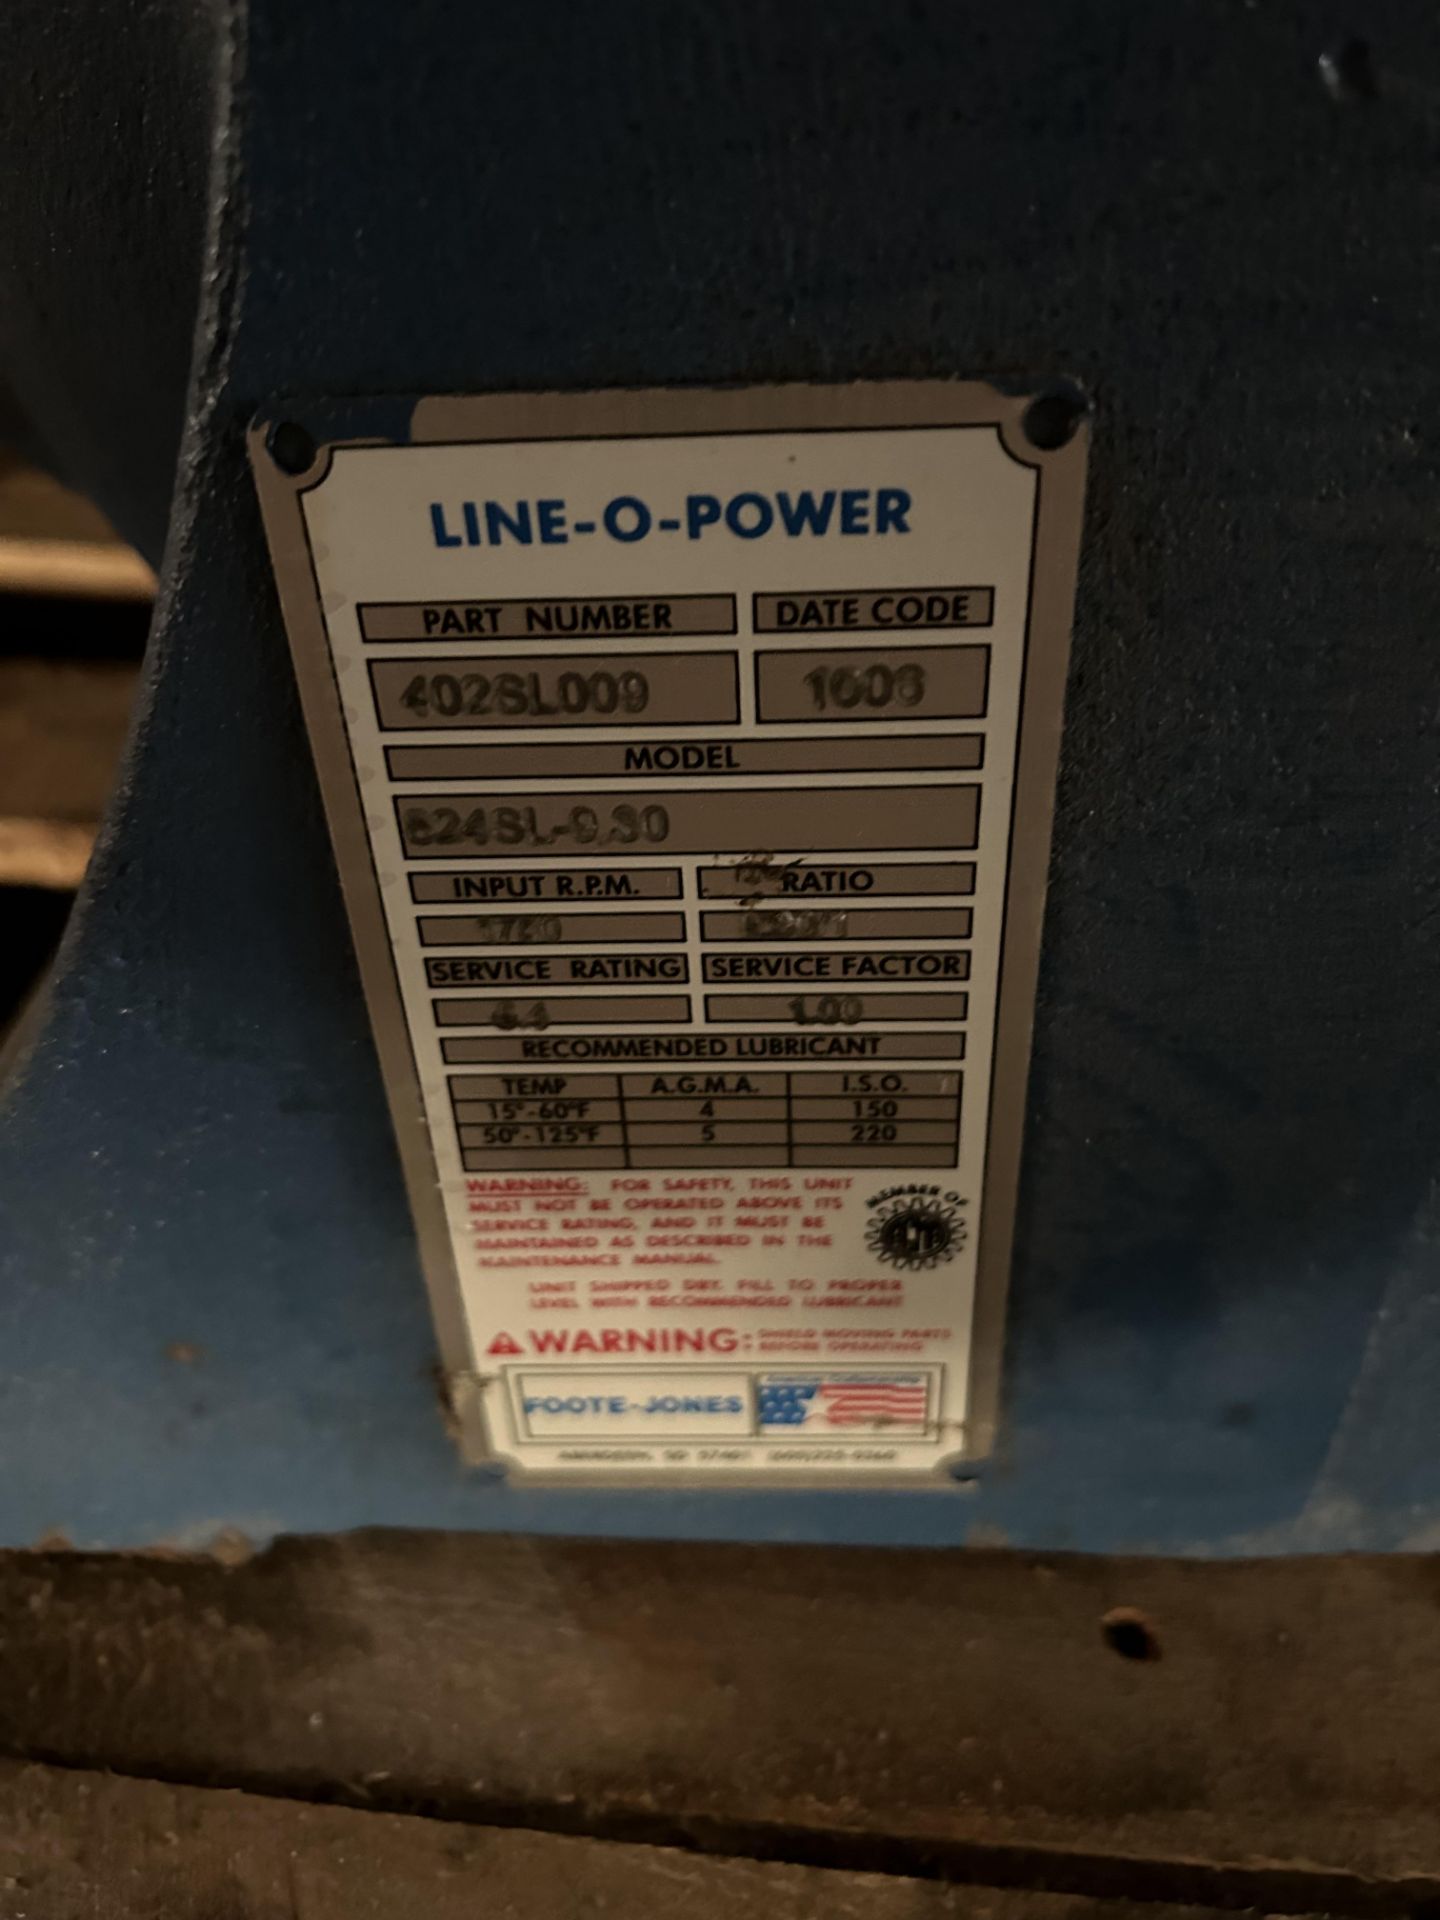 Line-o-Power Pump, Model #824BL-950, Rigging/ Removal Fee - $75 - Image 3 of 4